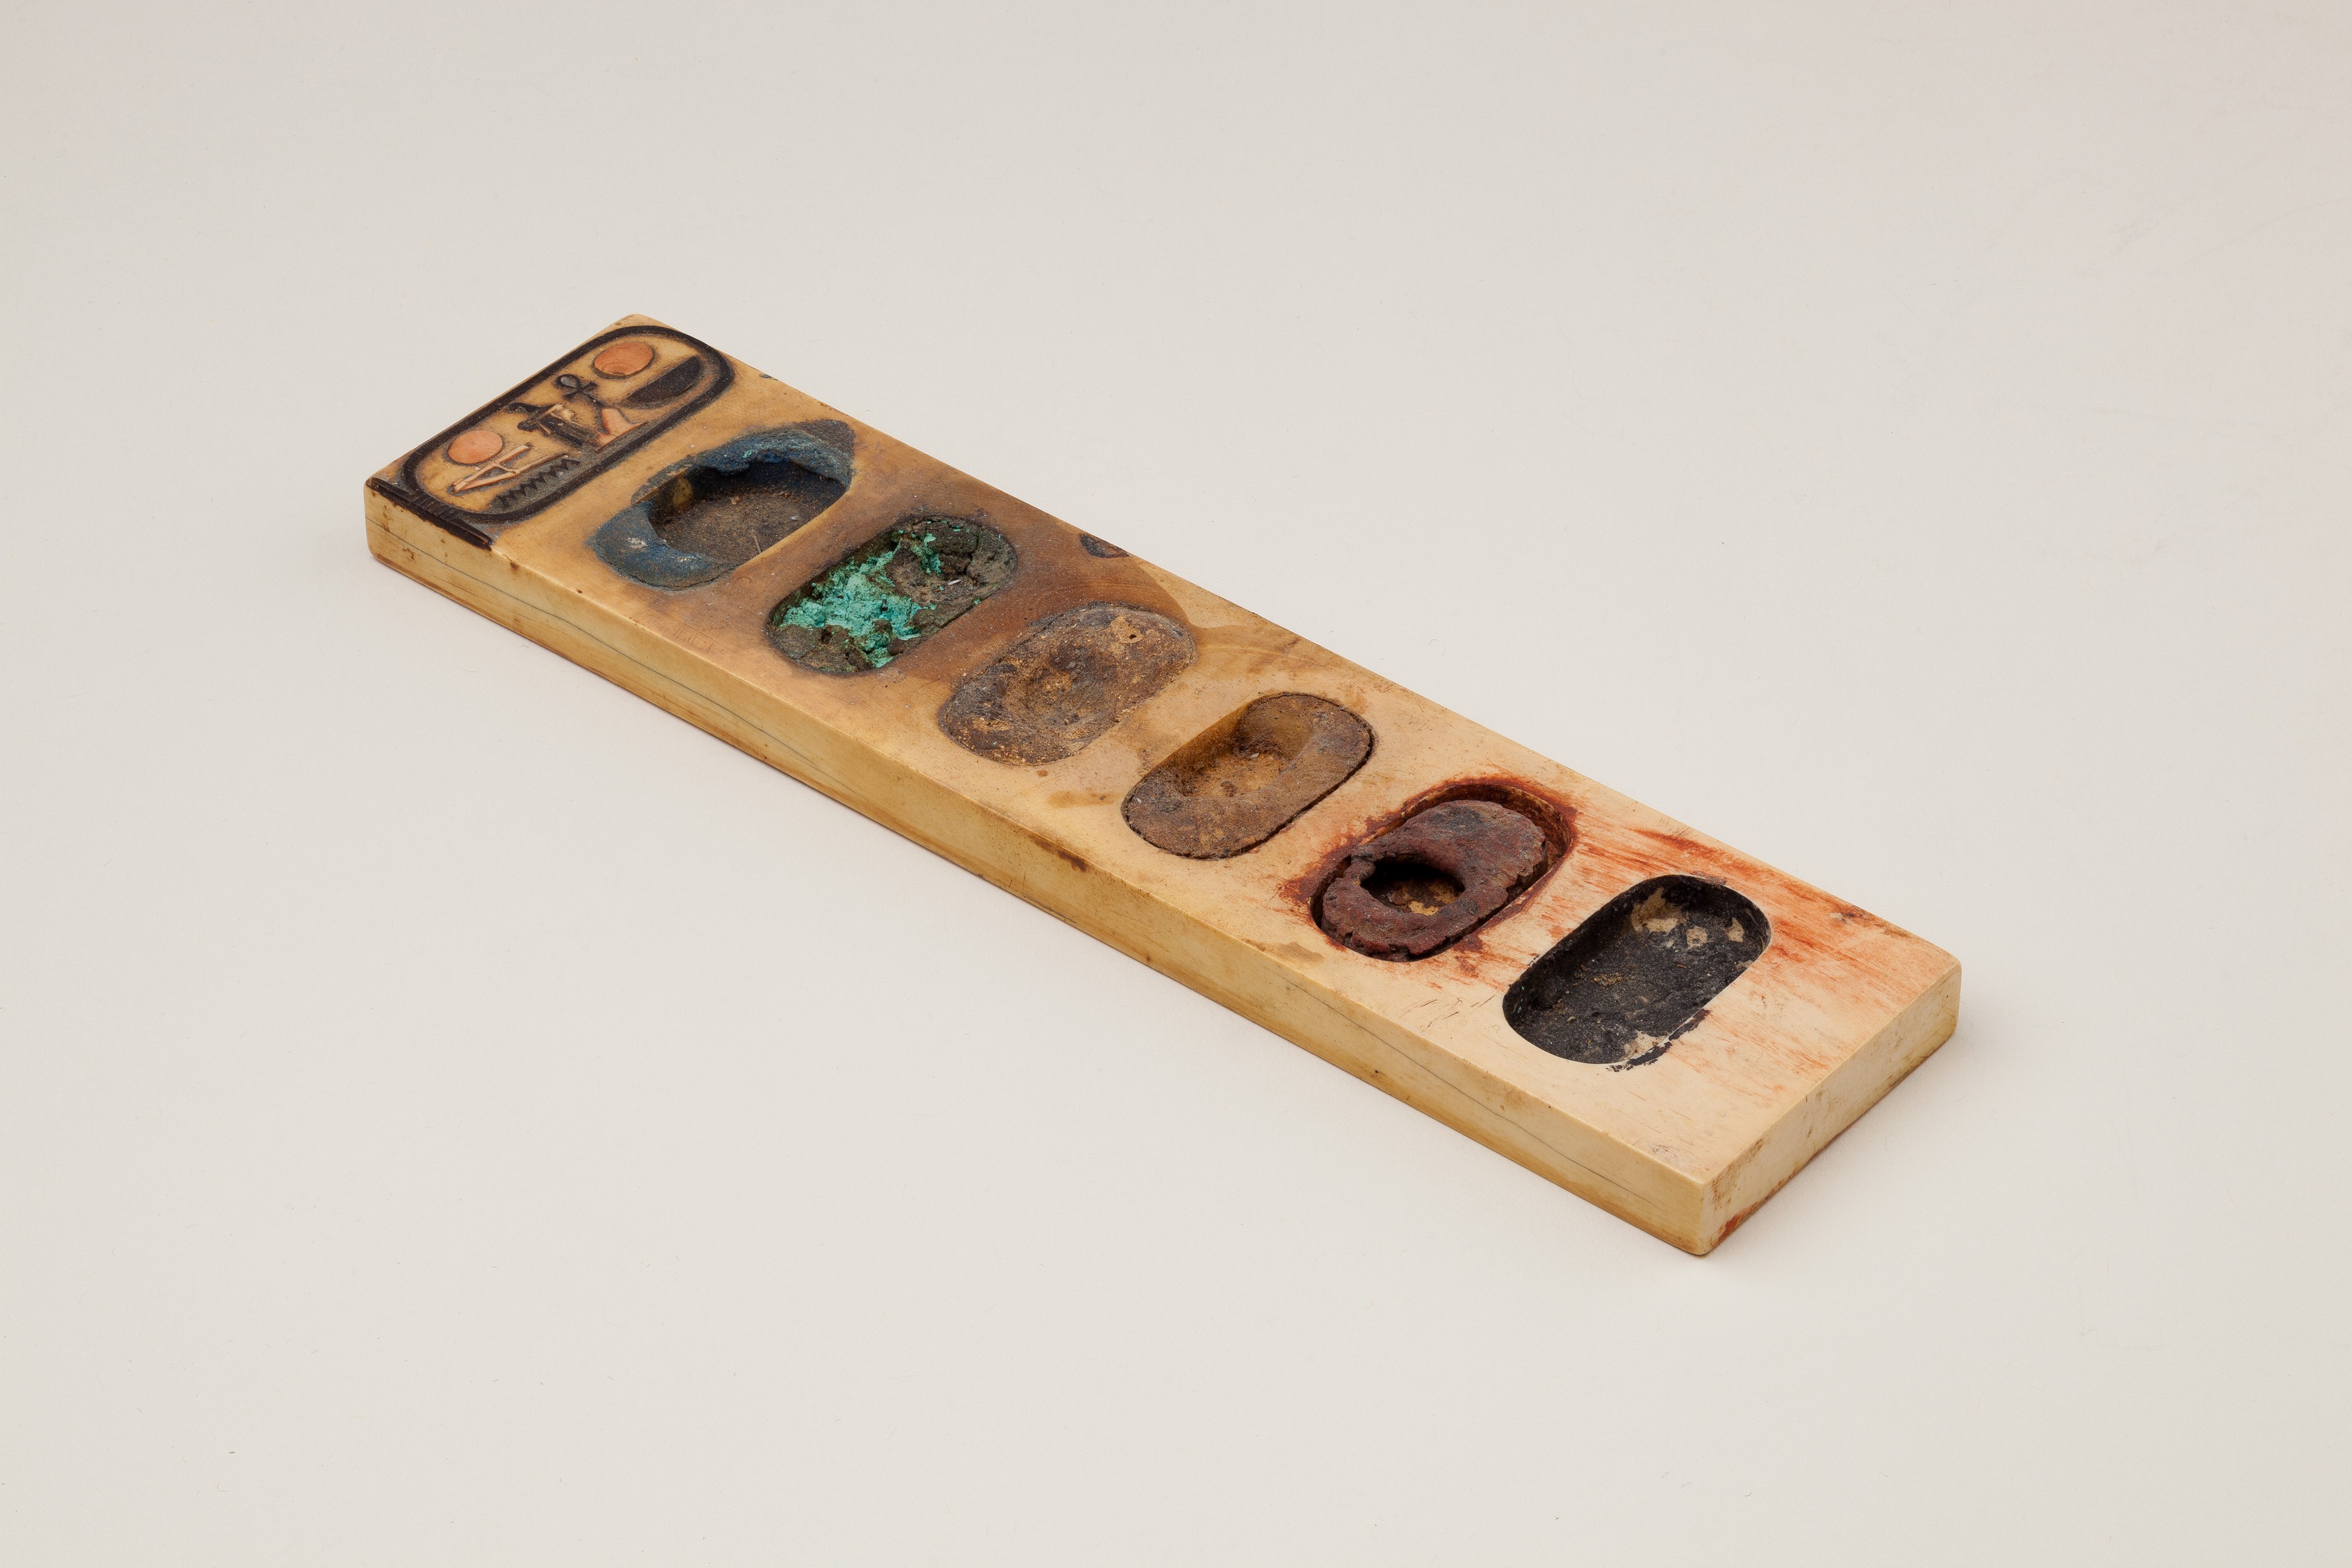 Painter's Palette Inscribed with the Name of Amenhotep III, New Kingdom